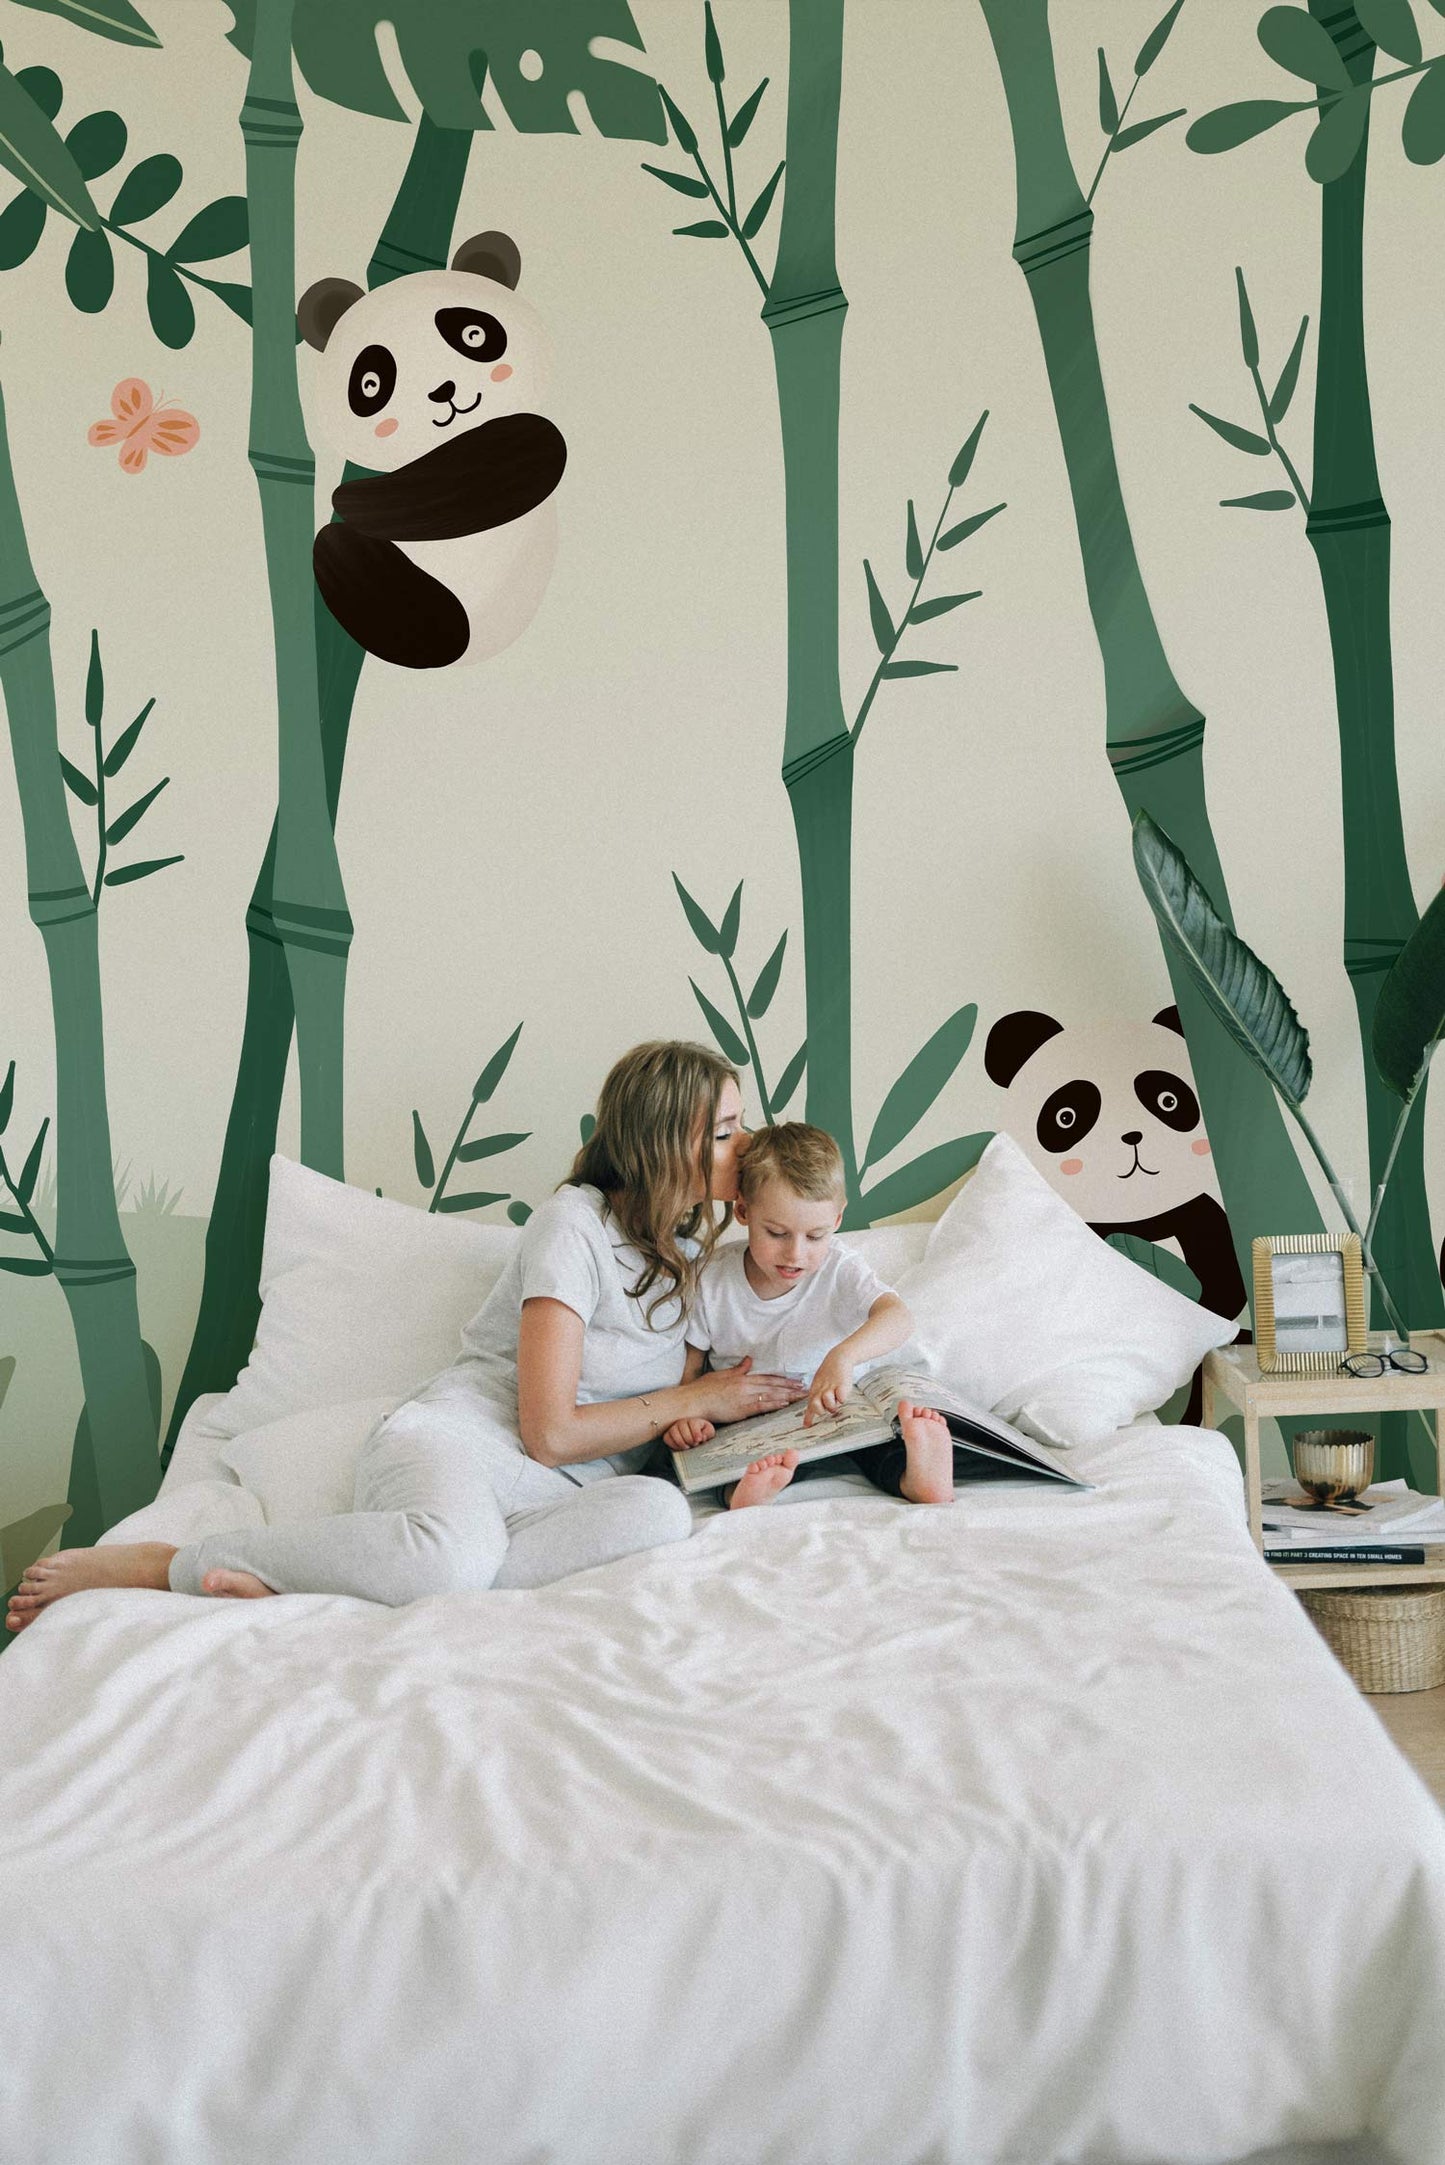 Animal Wallpaper Mural for Bedroom Featuring Pandas and Bamboo